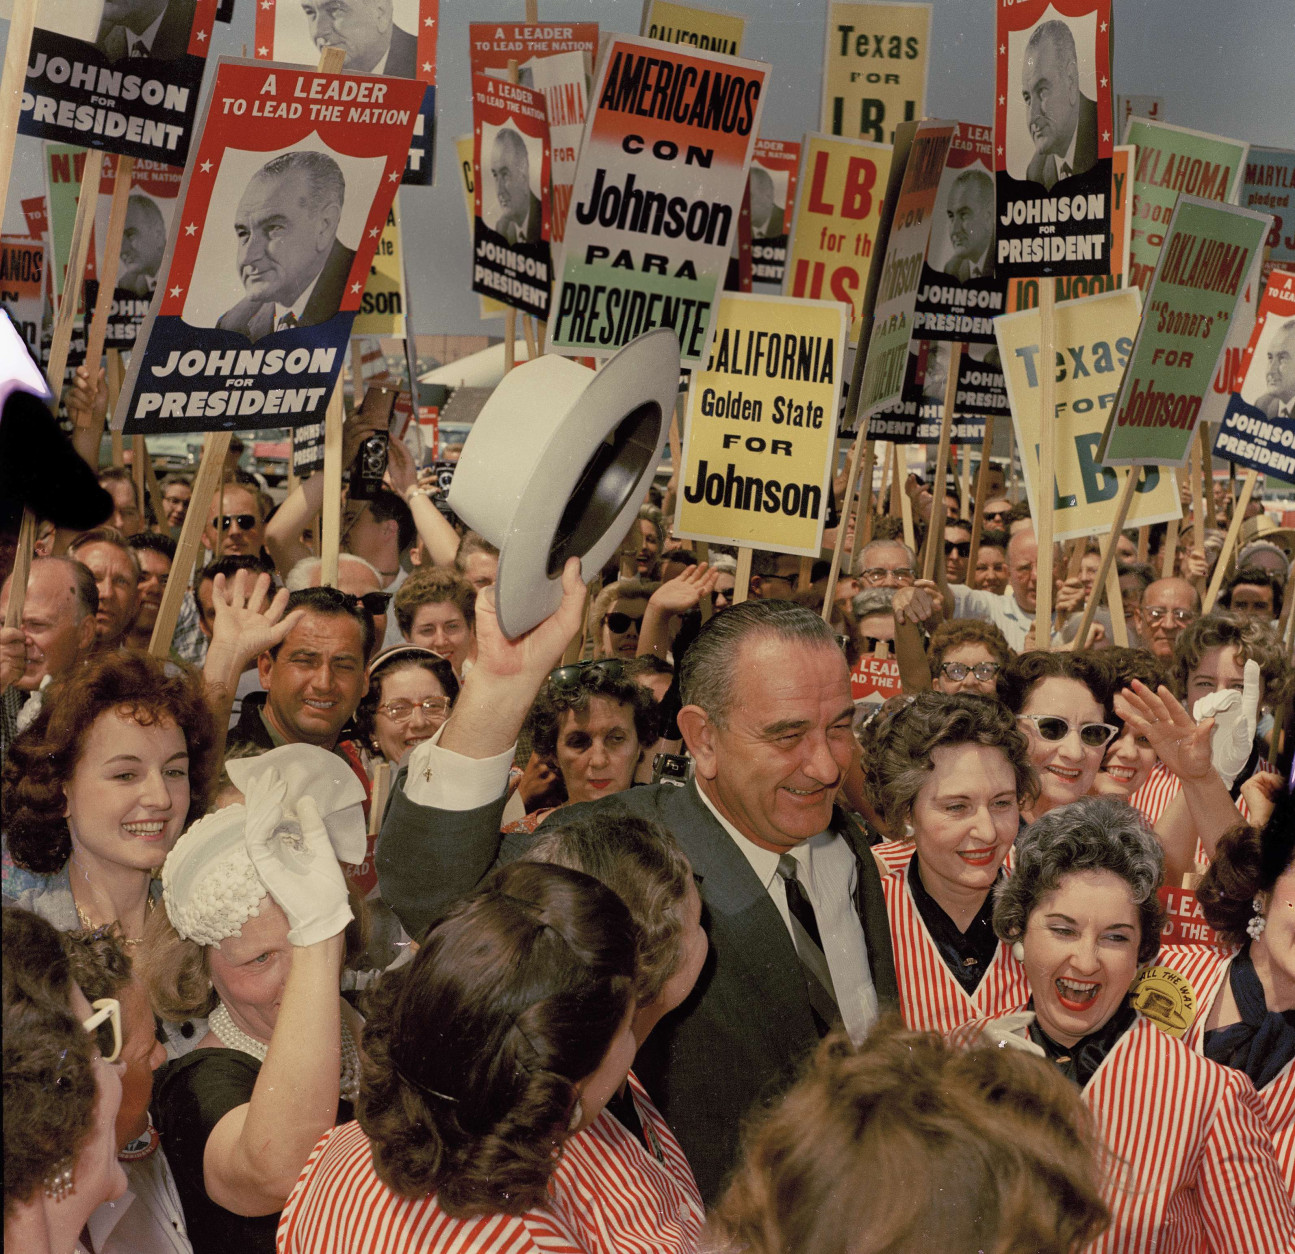 In 1965, President Lyndon B. Johnson signed the Voting Rights Act. Here, Johnson is seen surrounded by supporters as he arrives for the Democratic National Convention in Los Angeles, July 14, 1960.  (AP Photo/Edward Kitch)